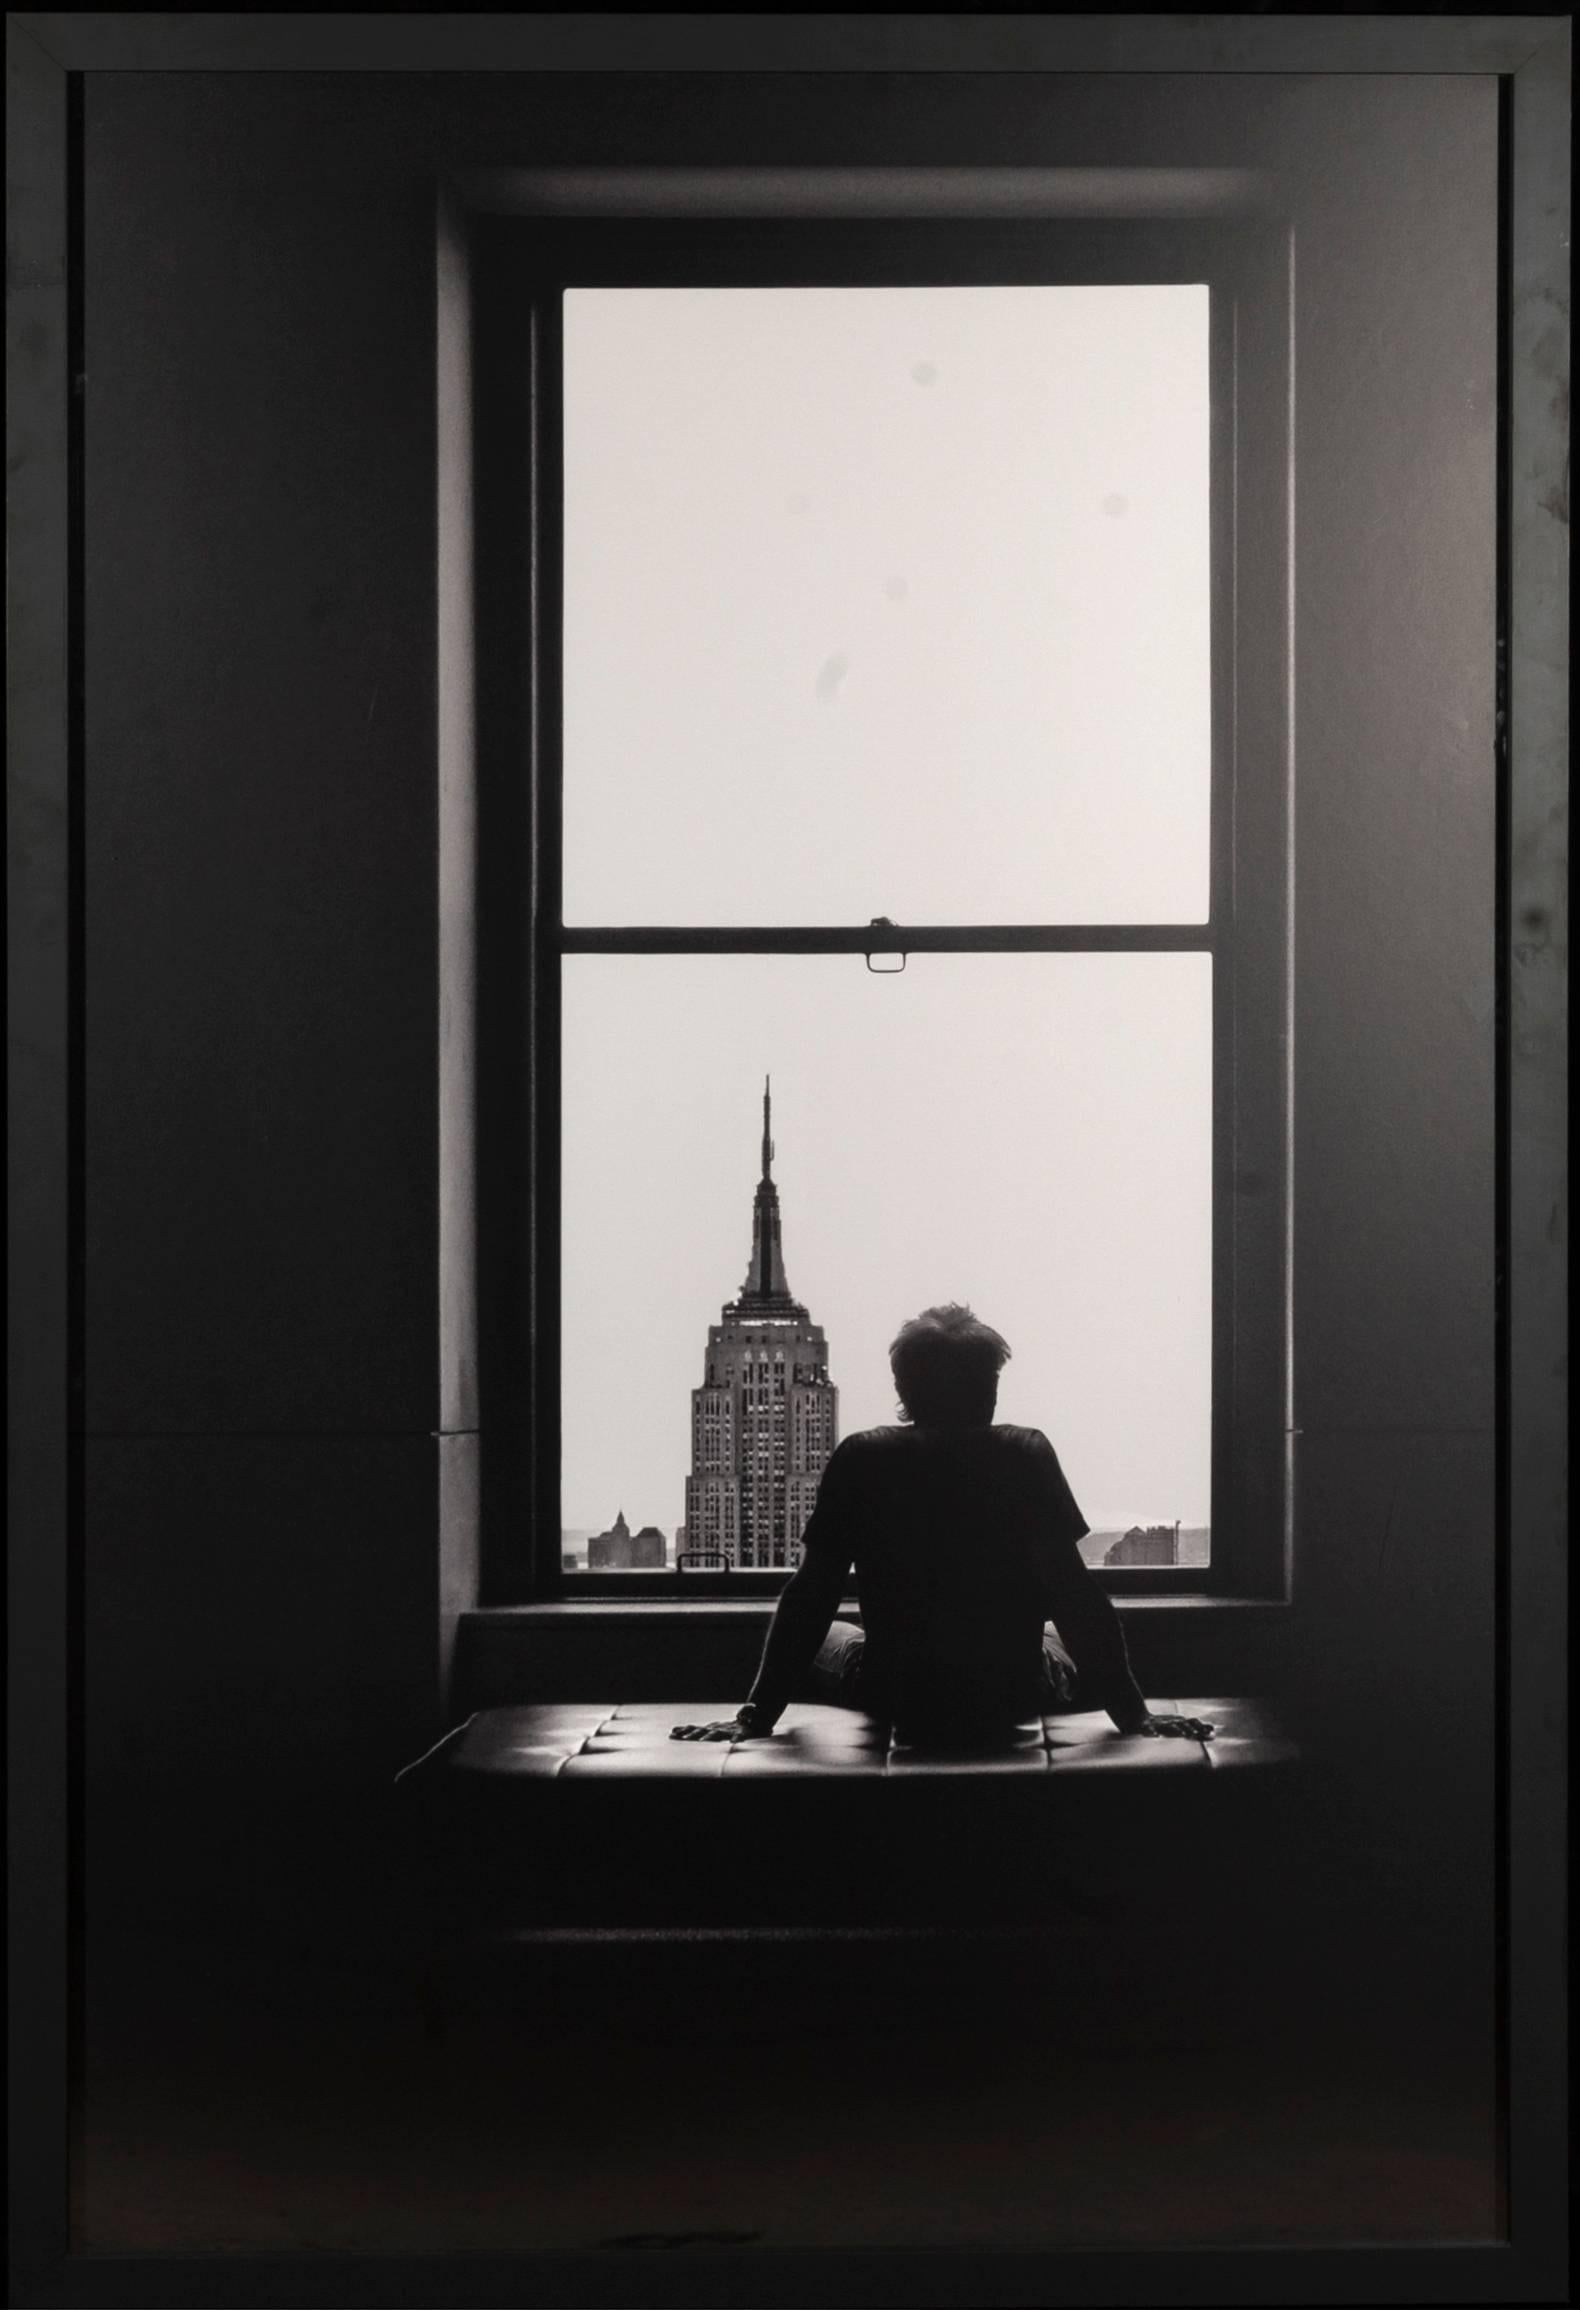 Lio, black and white photograph of New York